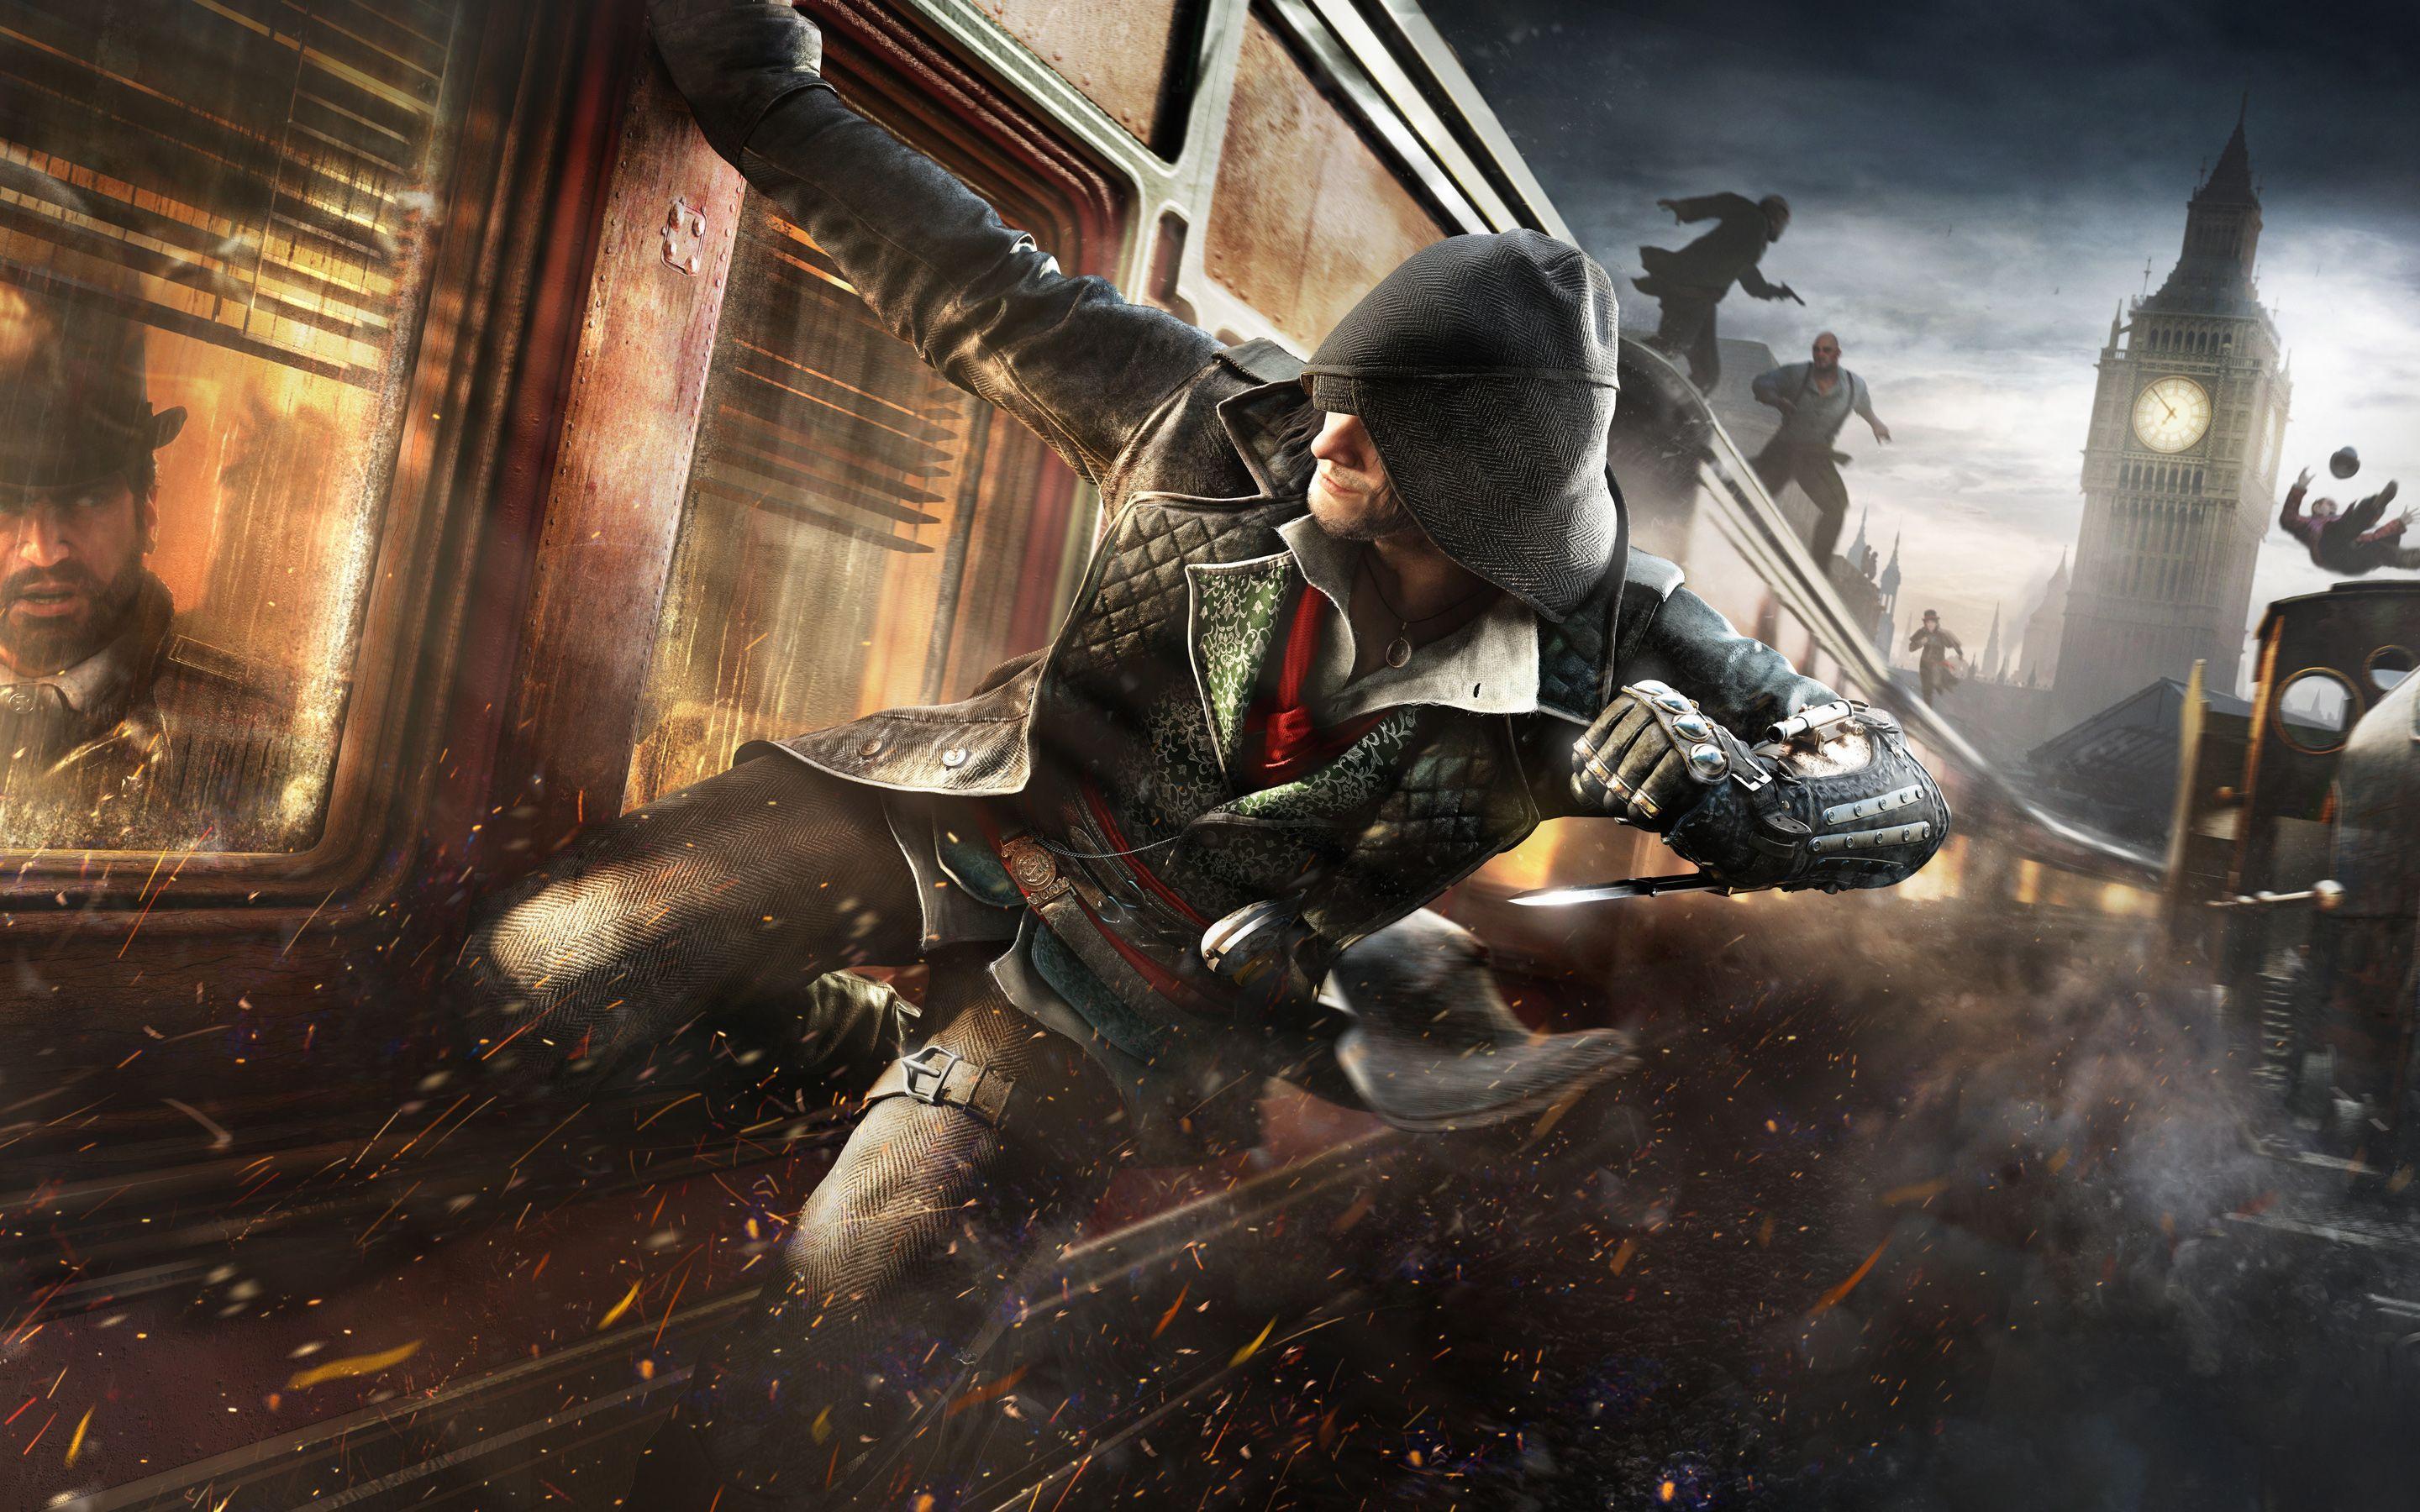 Assassin&;s Creed: Syndicate HD wallpaper free download